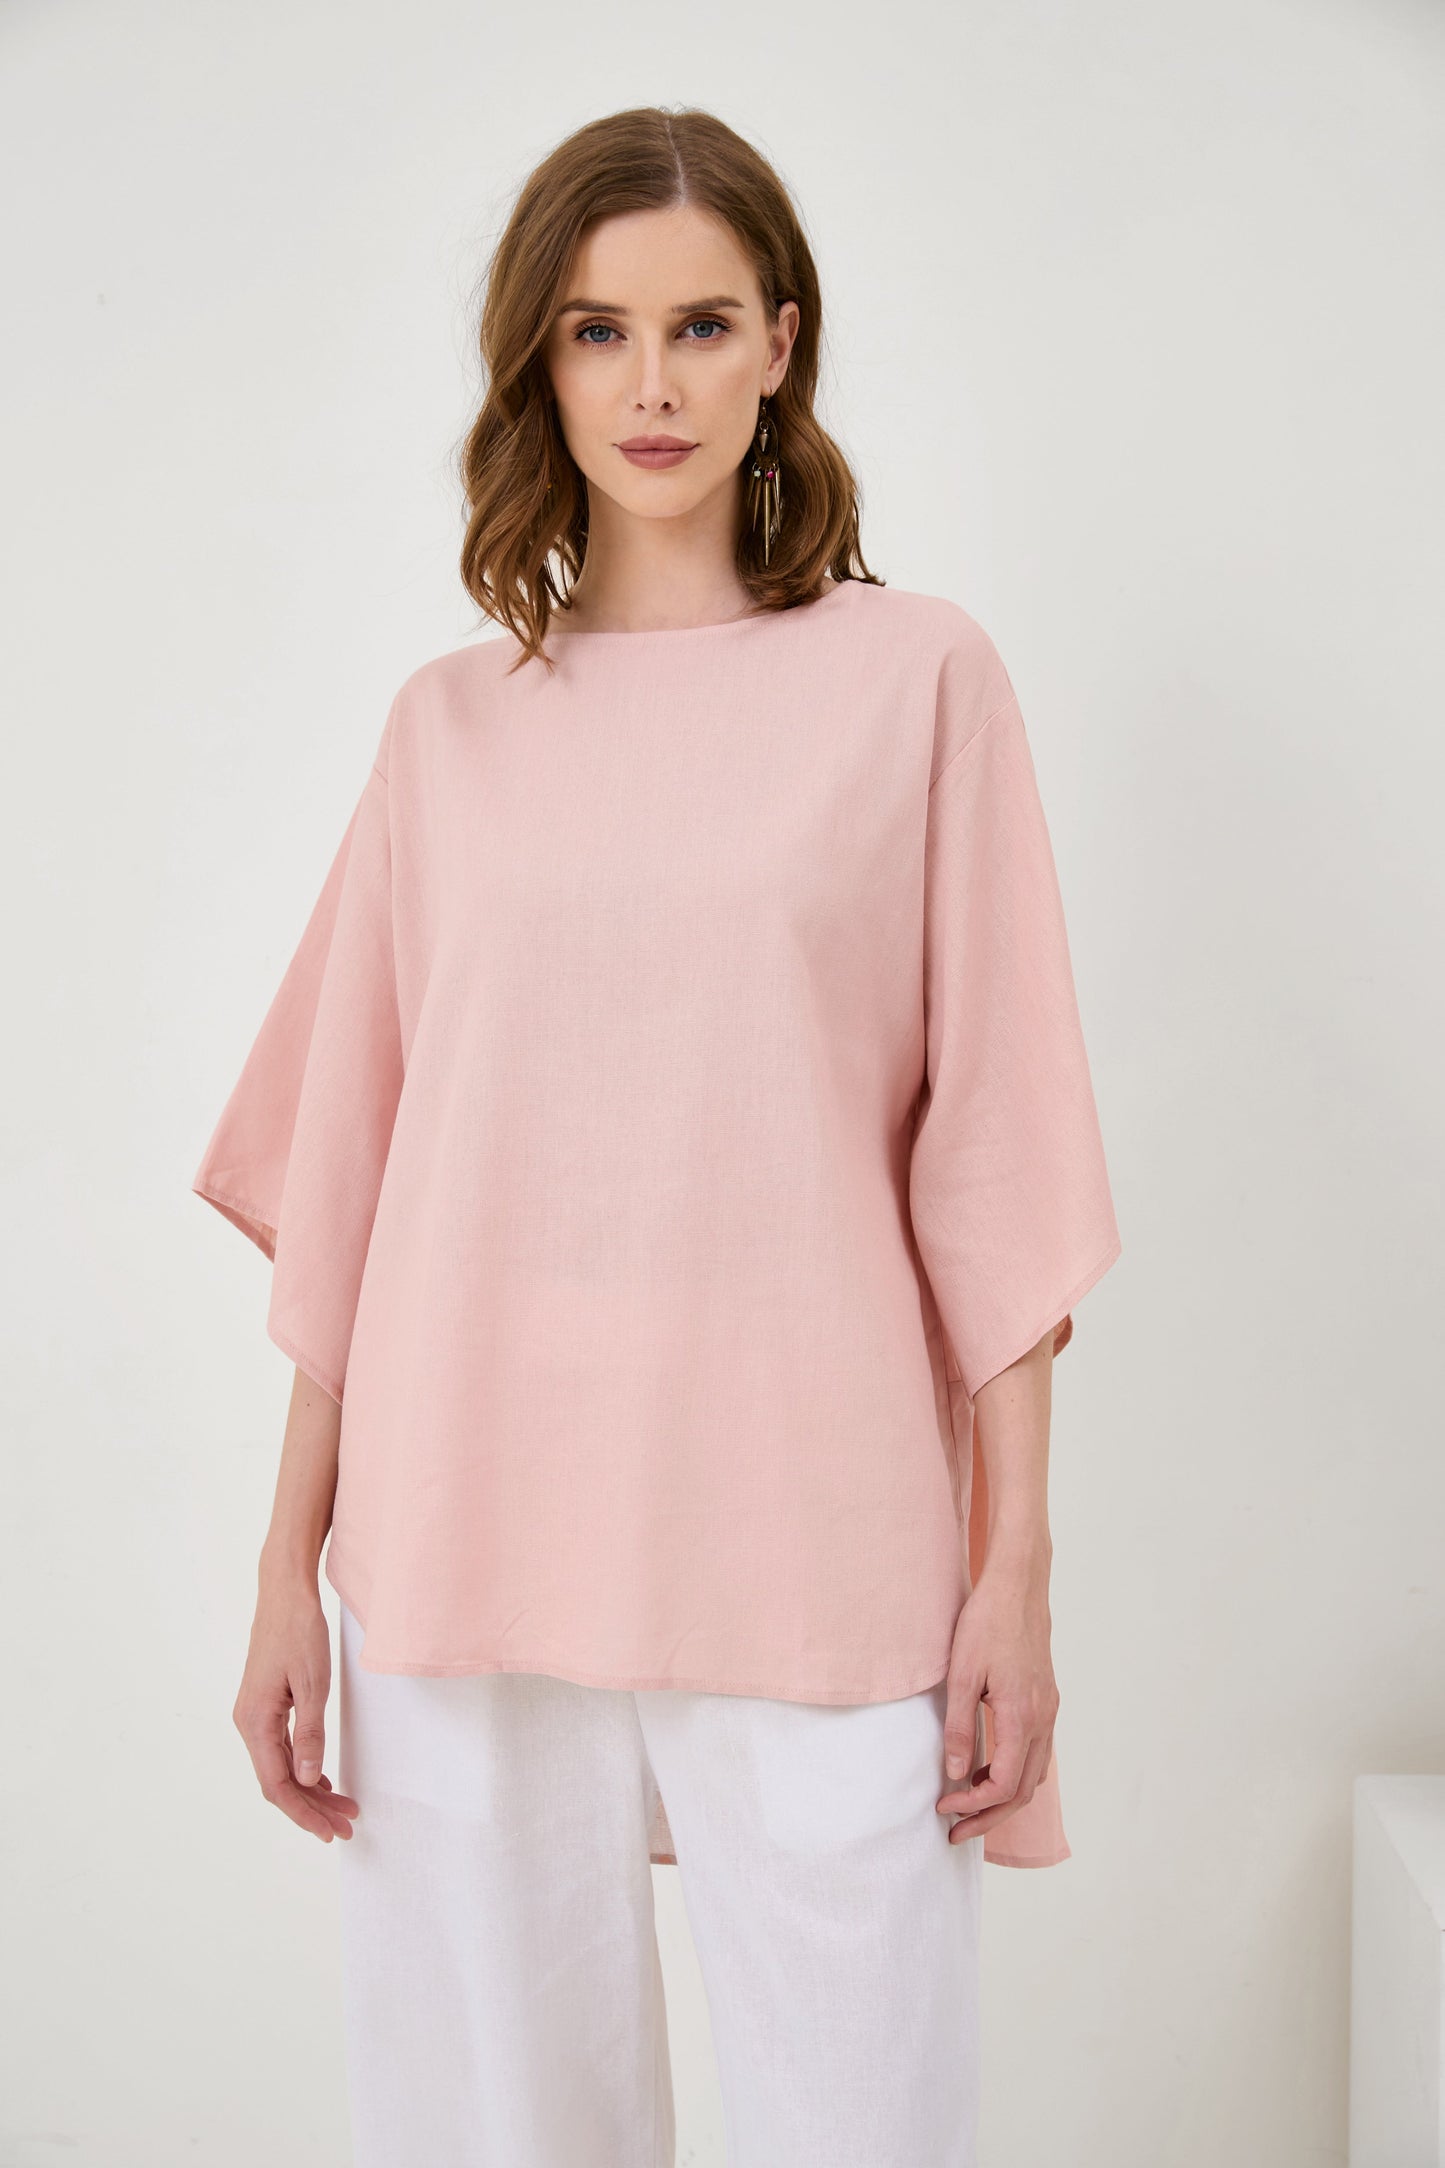 Cotton And Linen Solid Color Retro Round Neck Fashion Loose Top